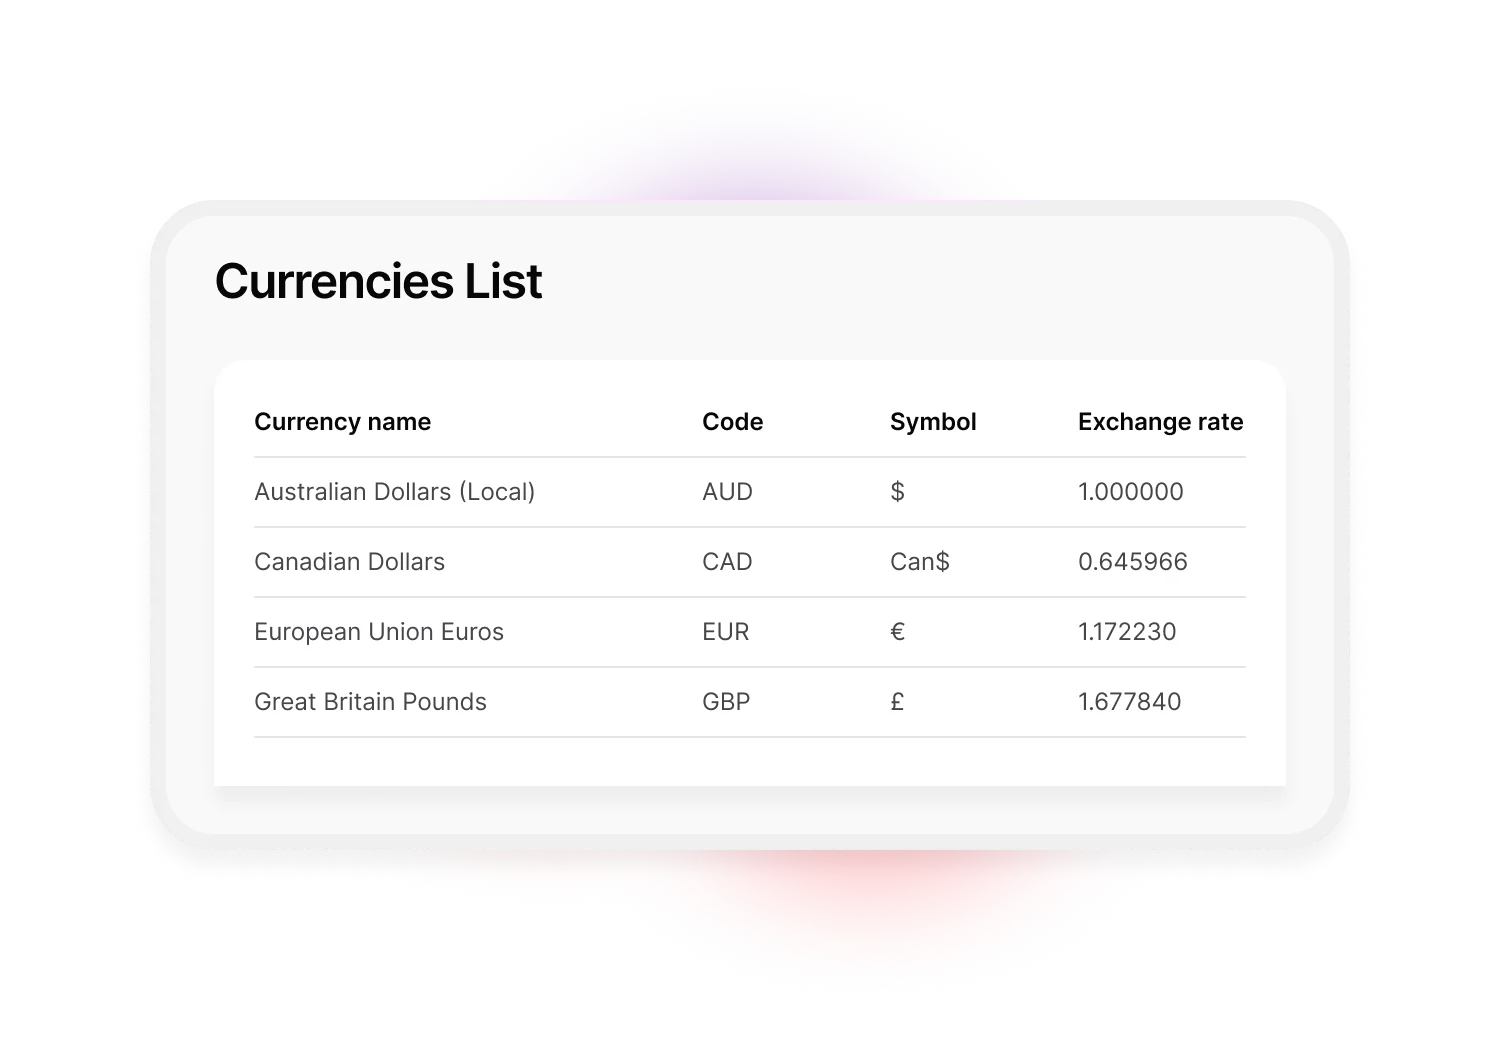 A list of currencies enabled for this example account, including currency name, code, symbol and current exchange rate.